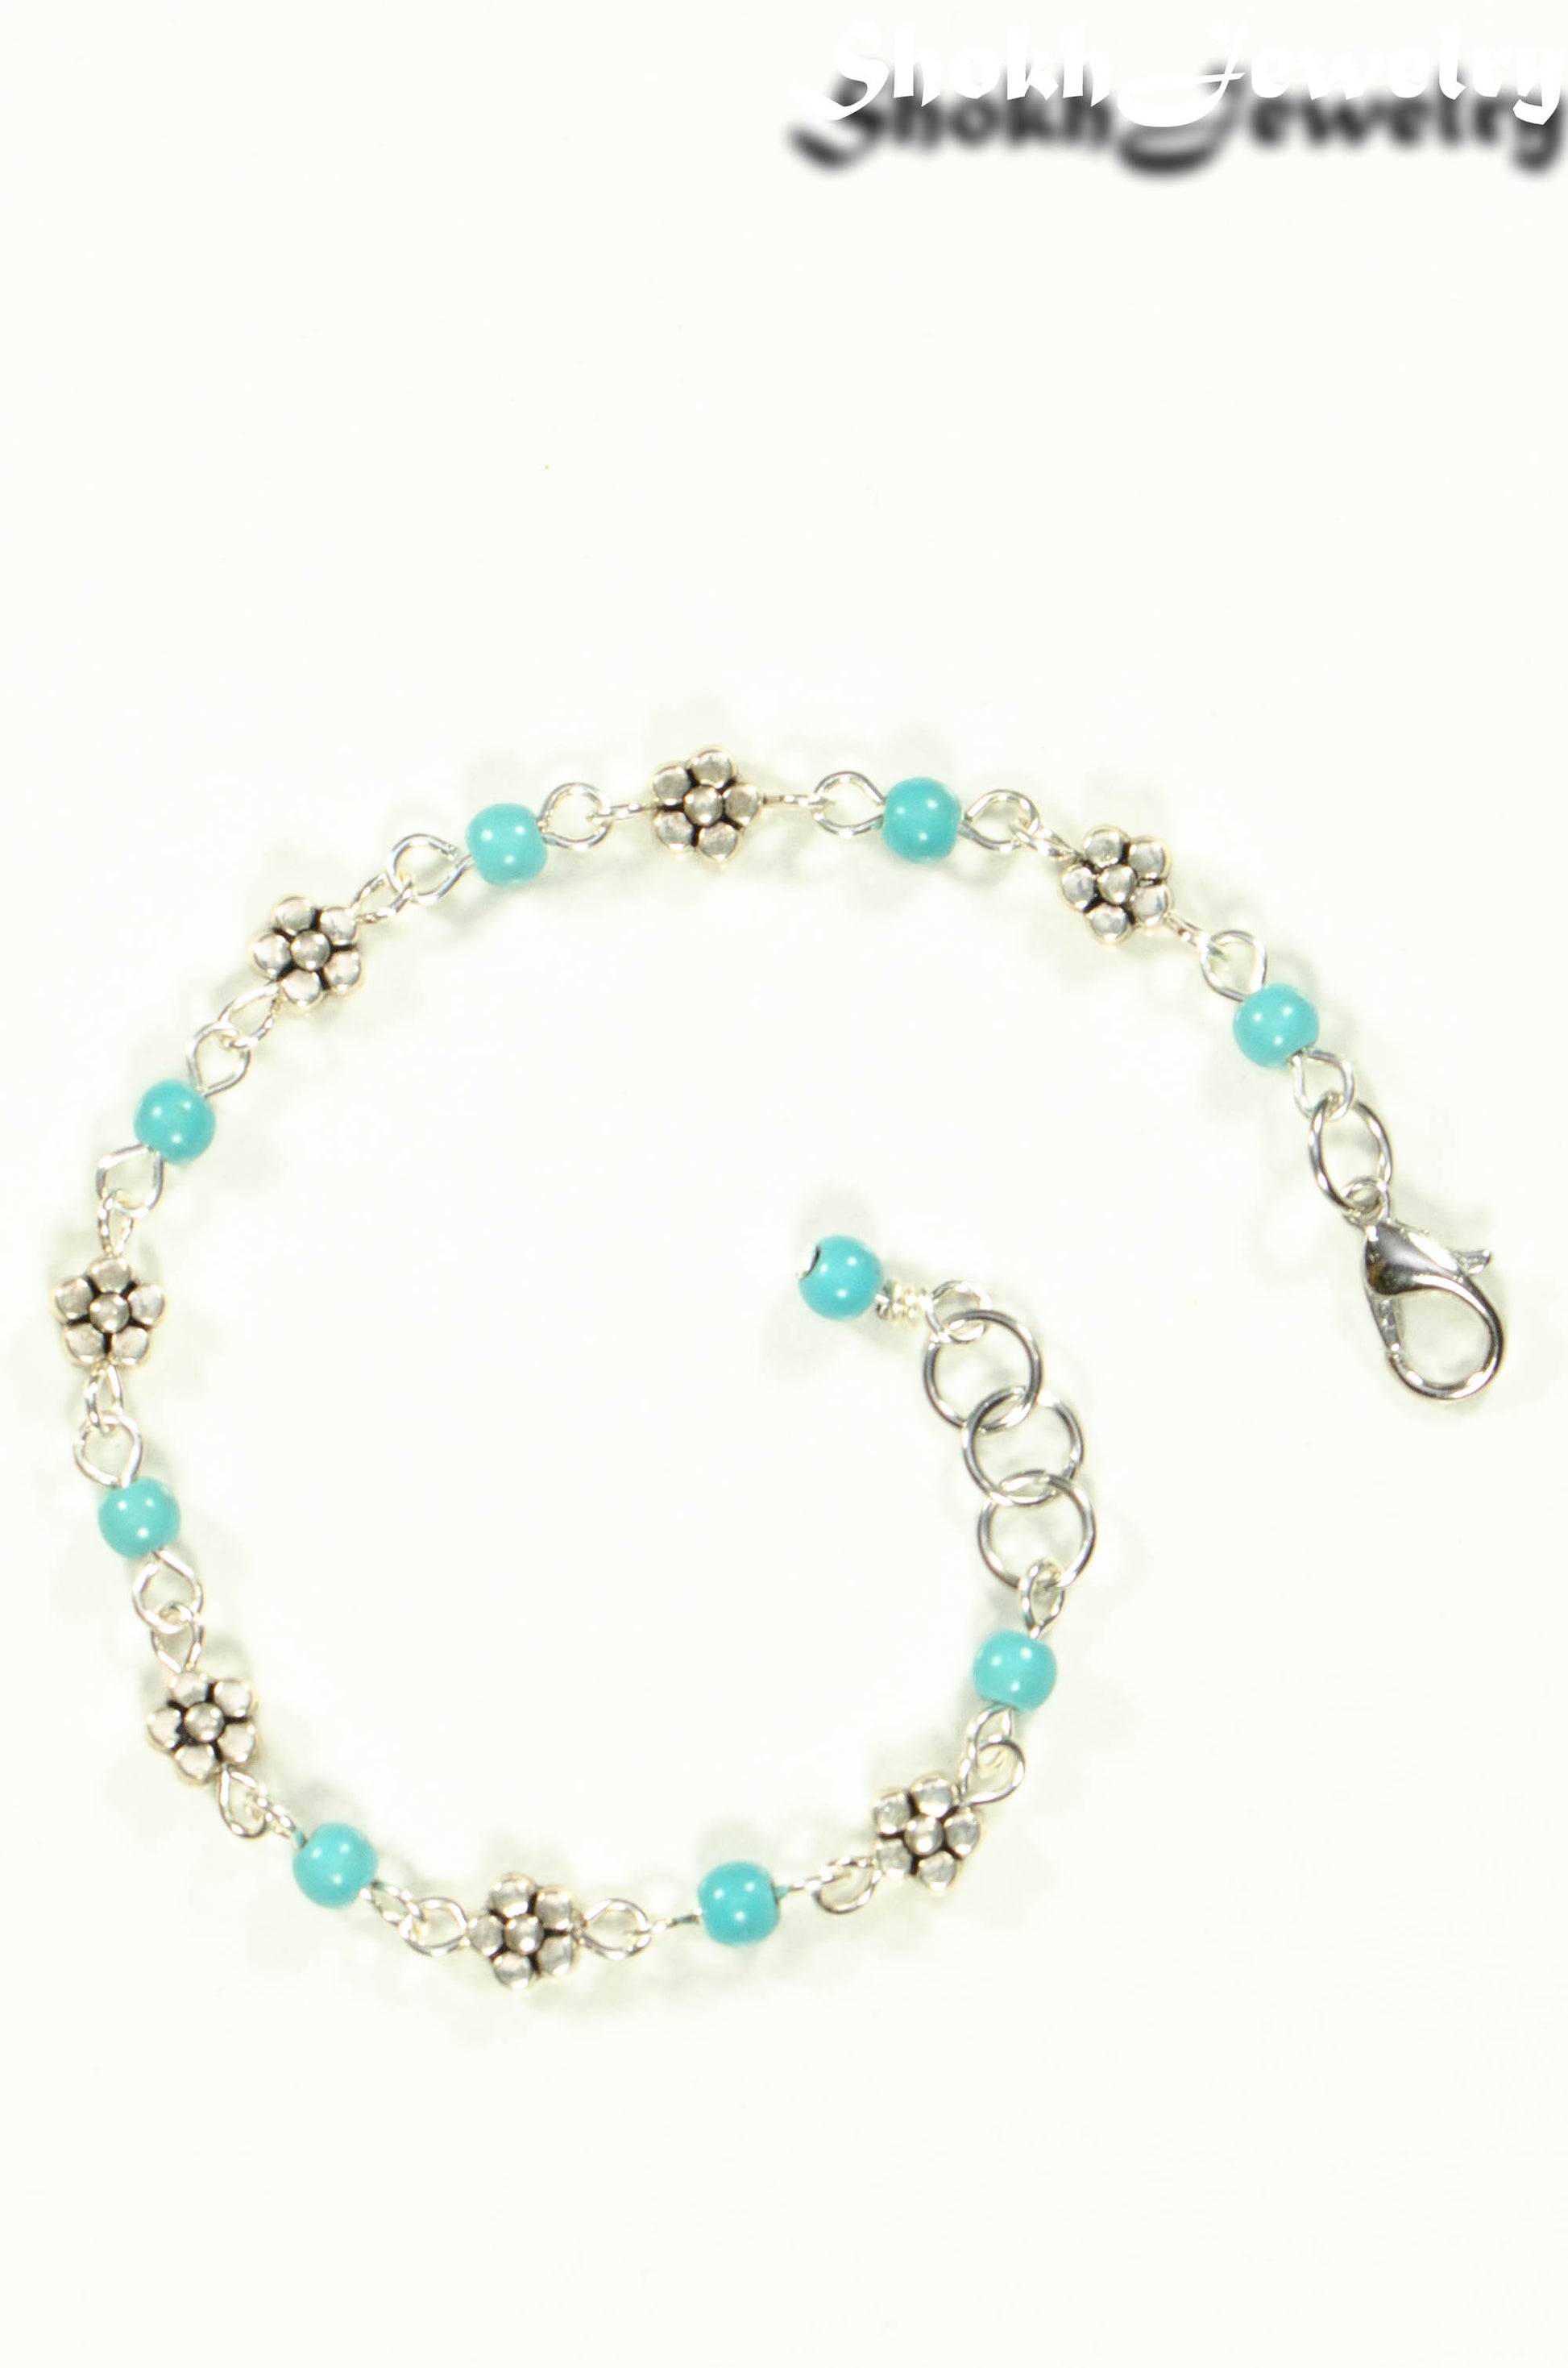 Top view of Tibetan Silver Flower and Turquoise Howlite Link Bracelet.